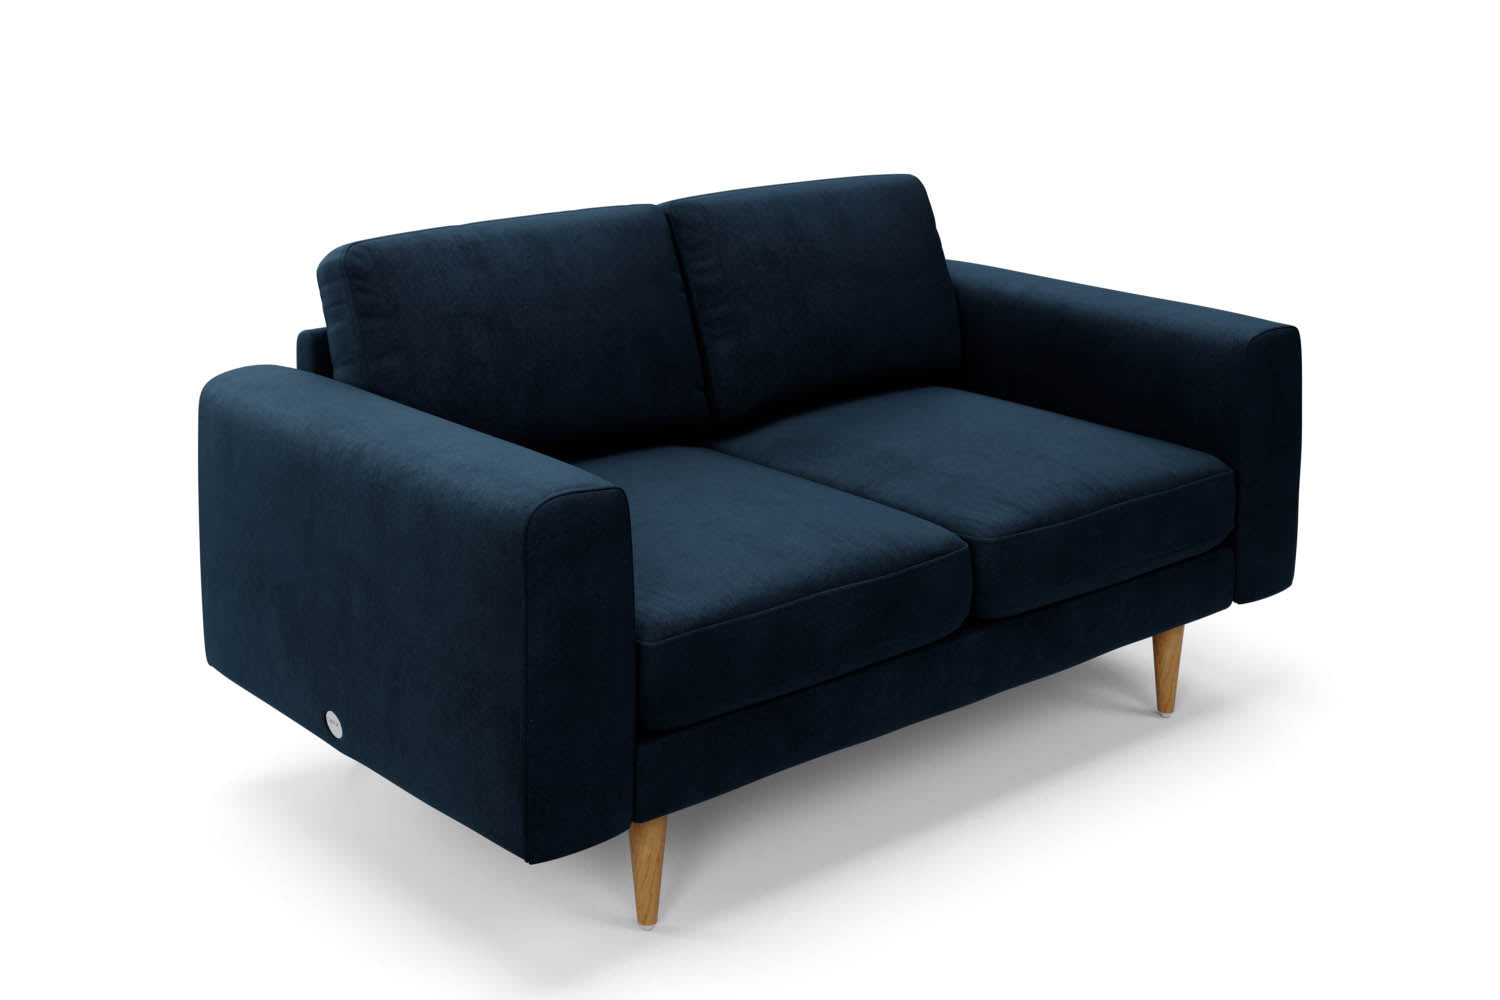 SNUG | The Big Chill 2 Seater Sofa in Deep Blue 